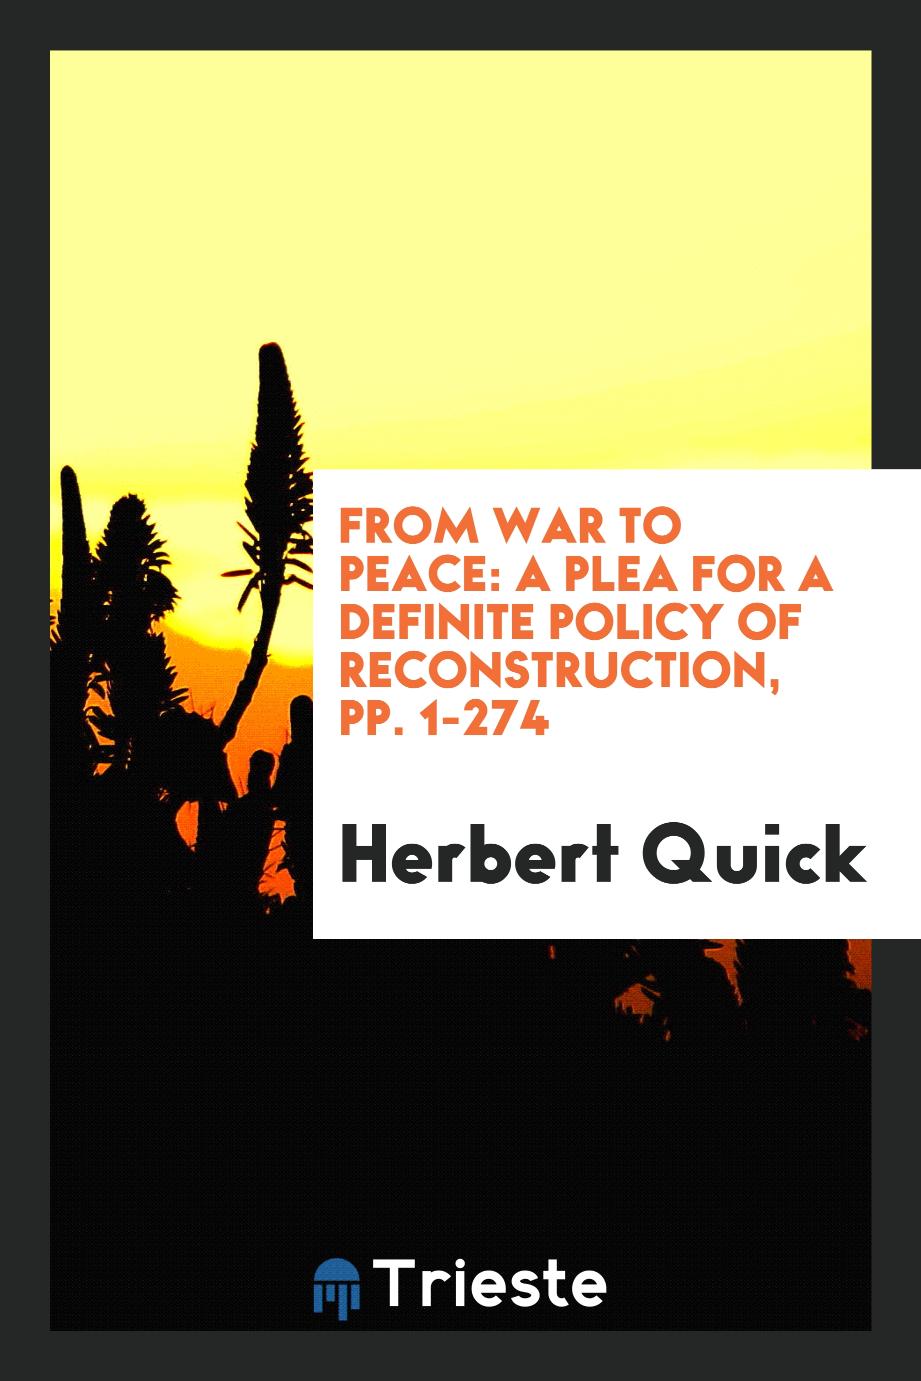 From War to Peace: A Plea for a Definite Policy of Reconstruction, pp. 1-274